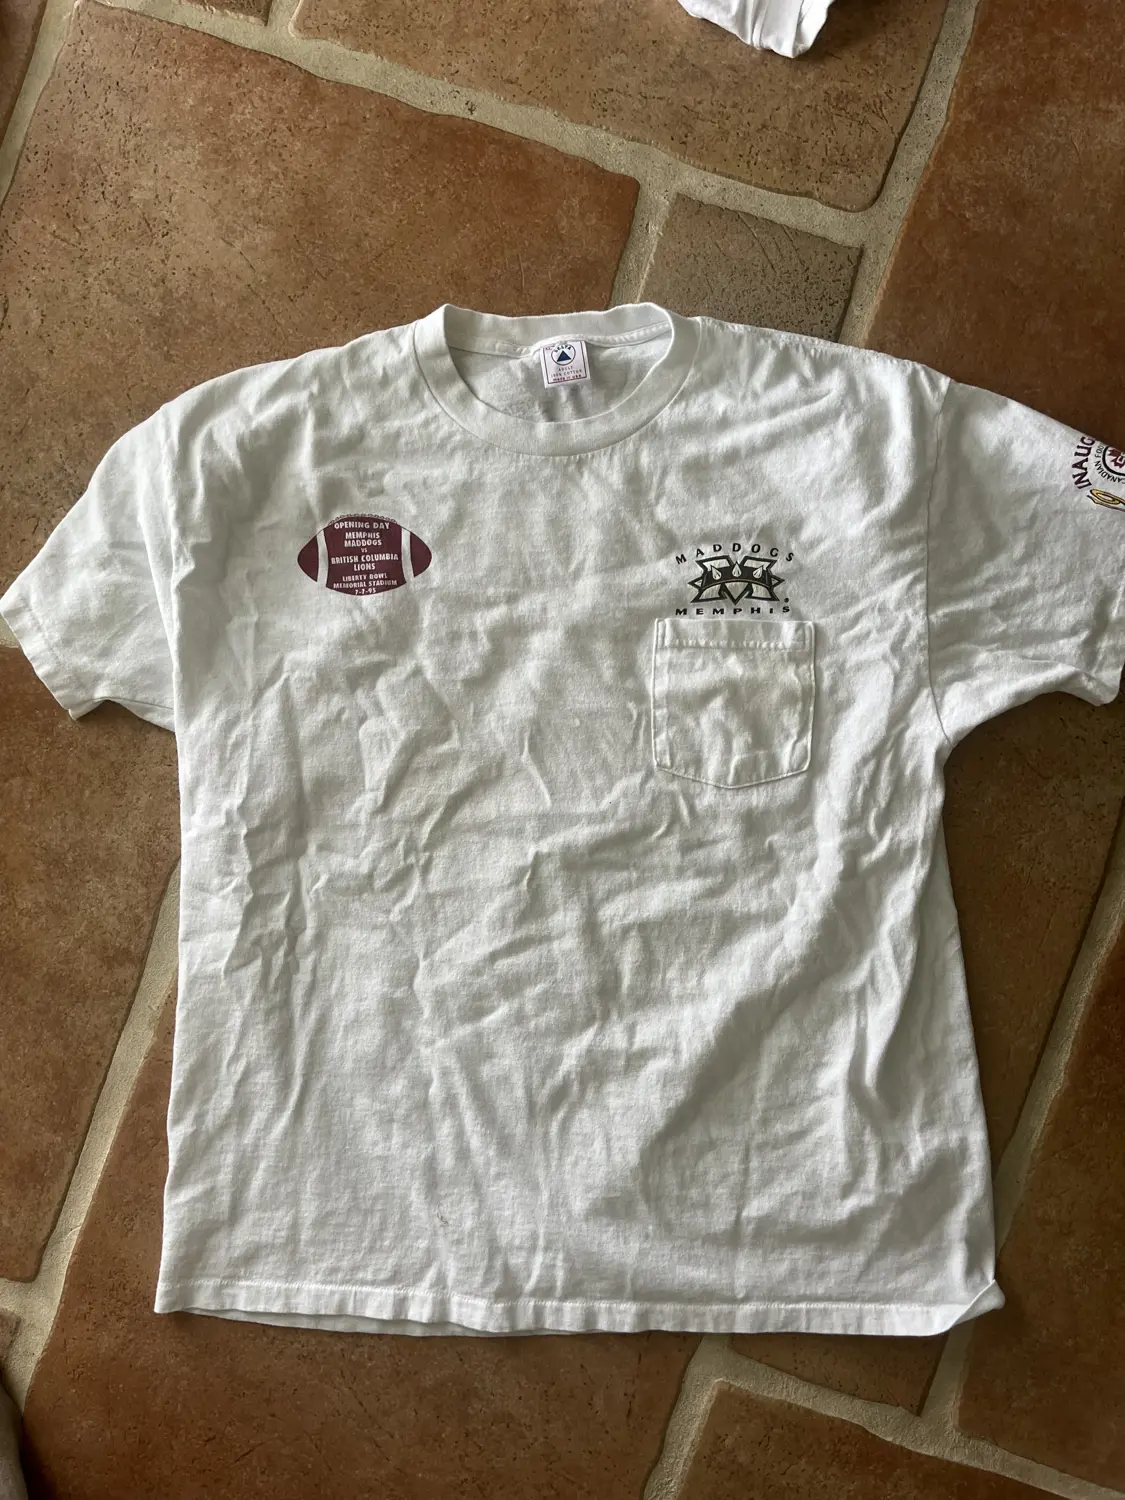 1995 memphis mad dogs graphic tee